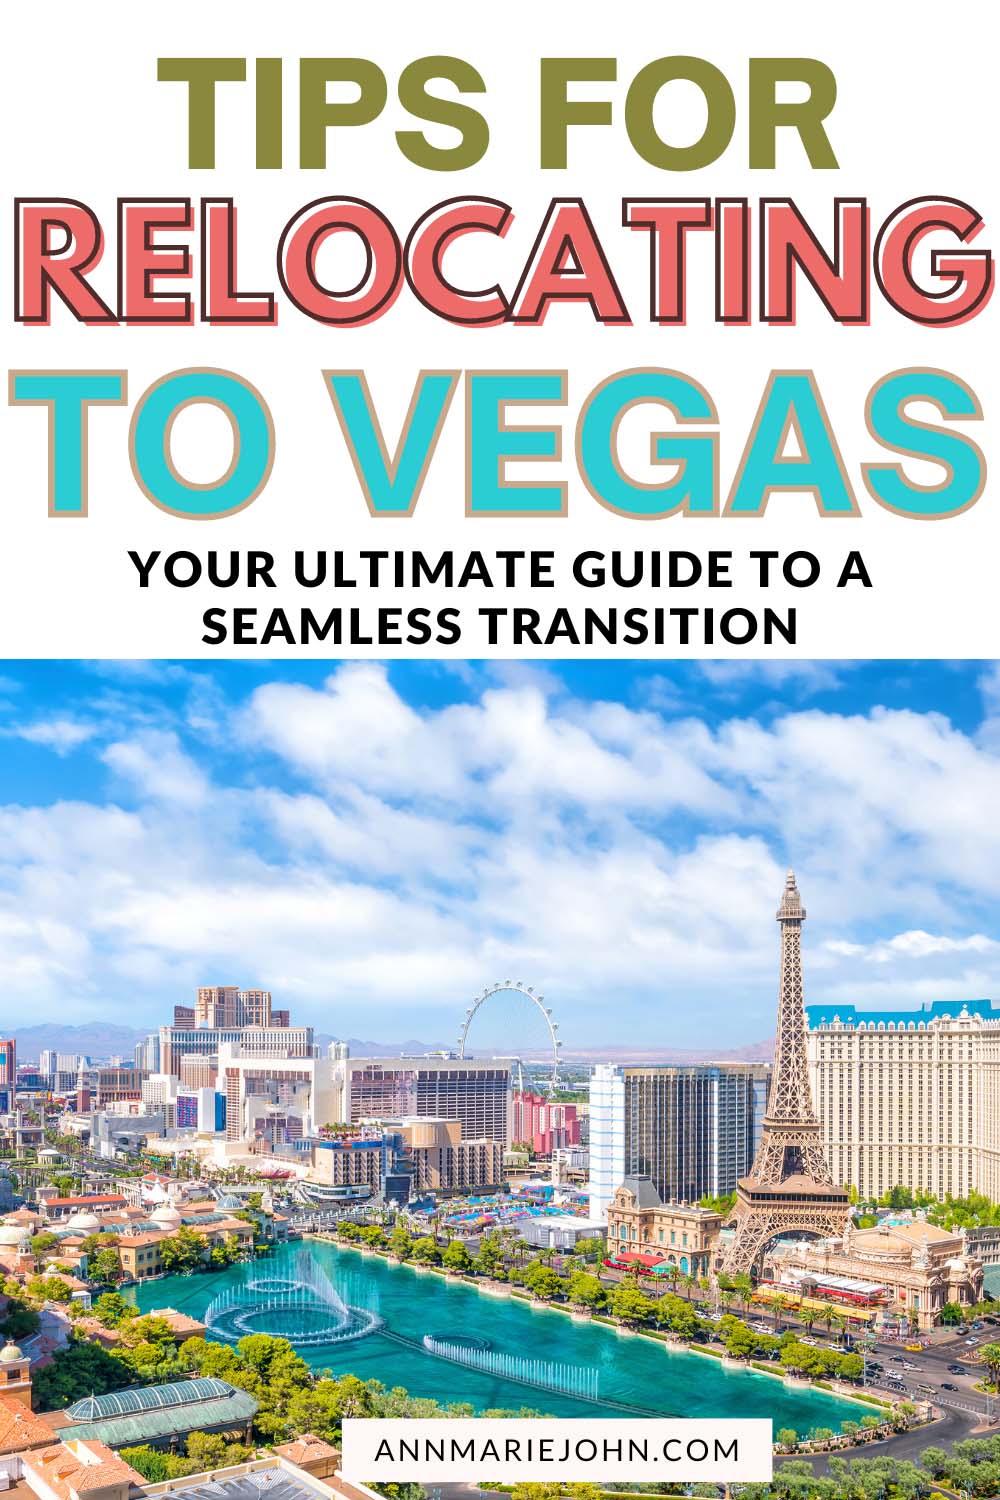 Tips for Relocating to Vegas